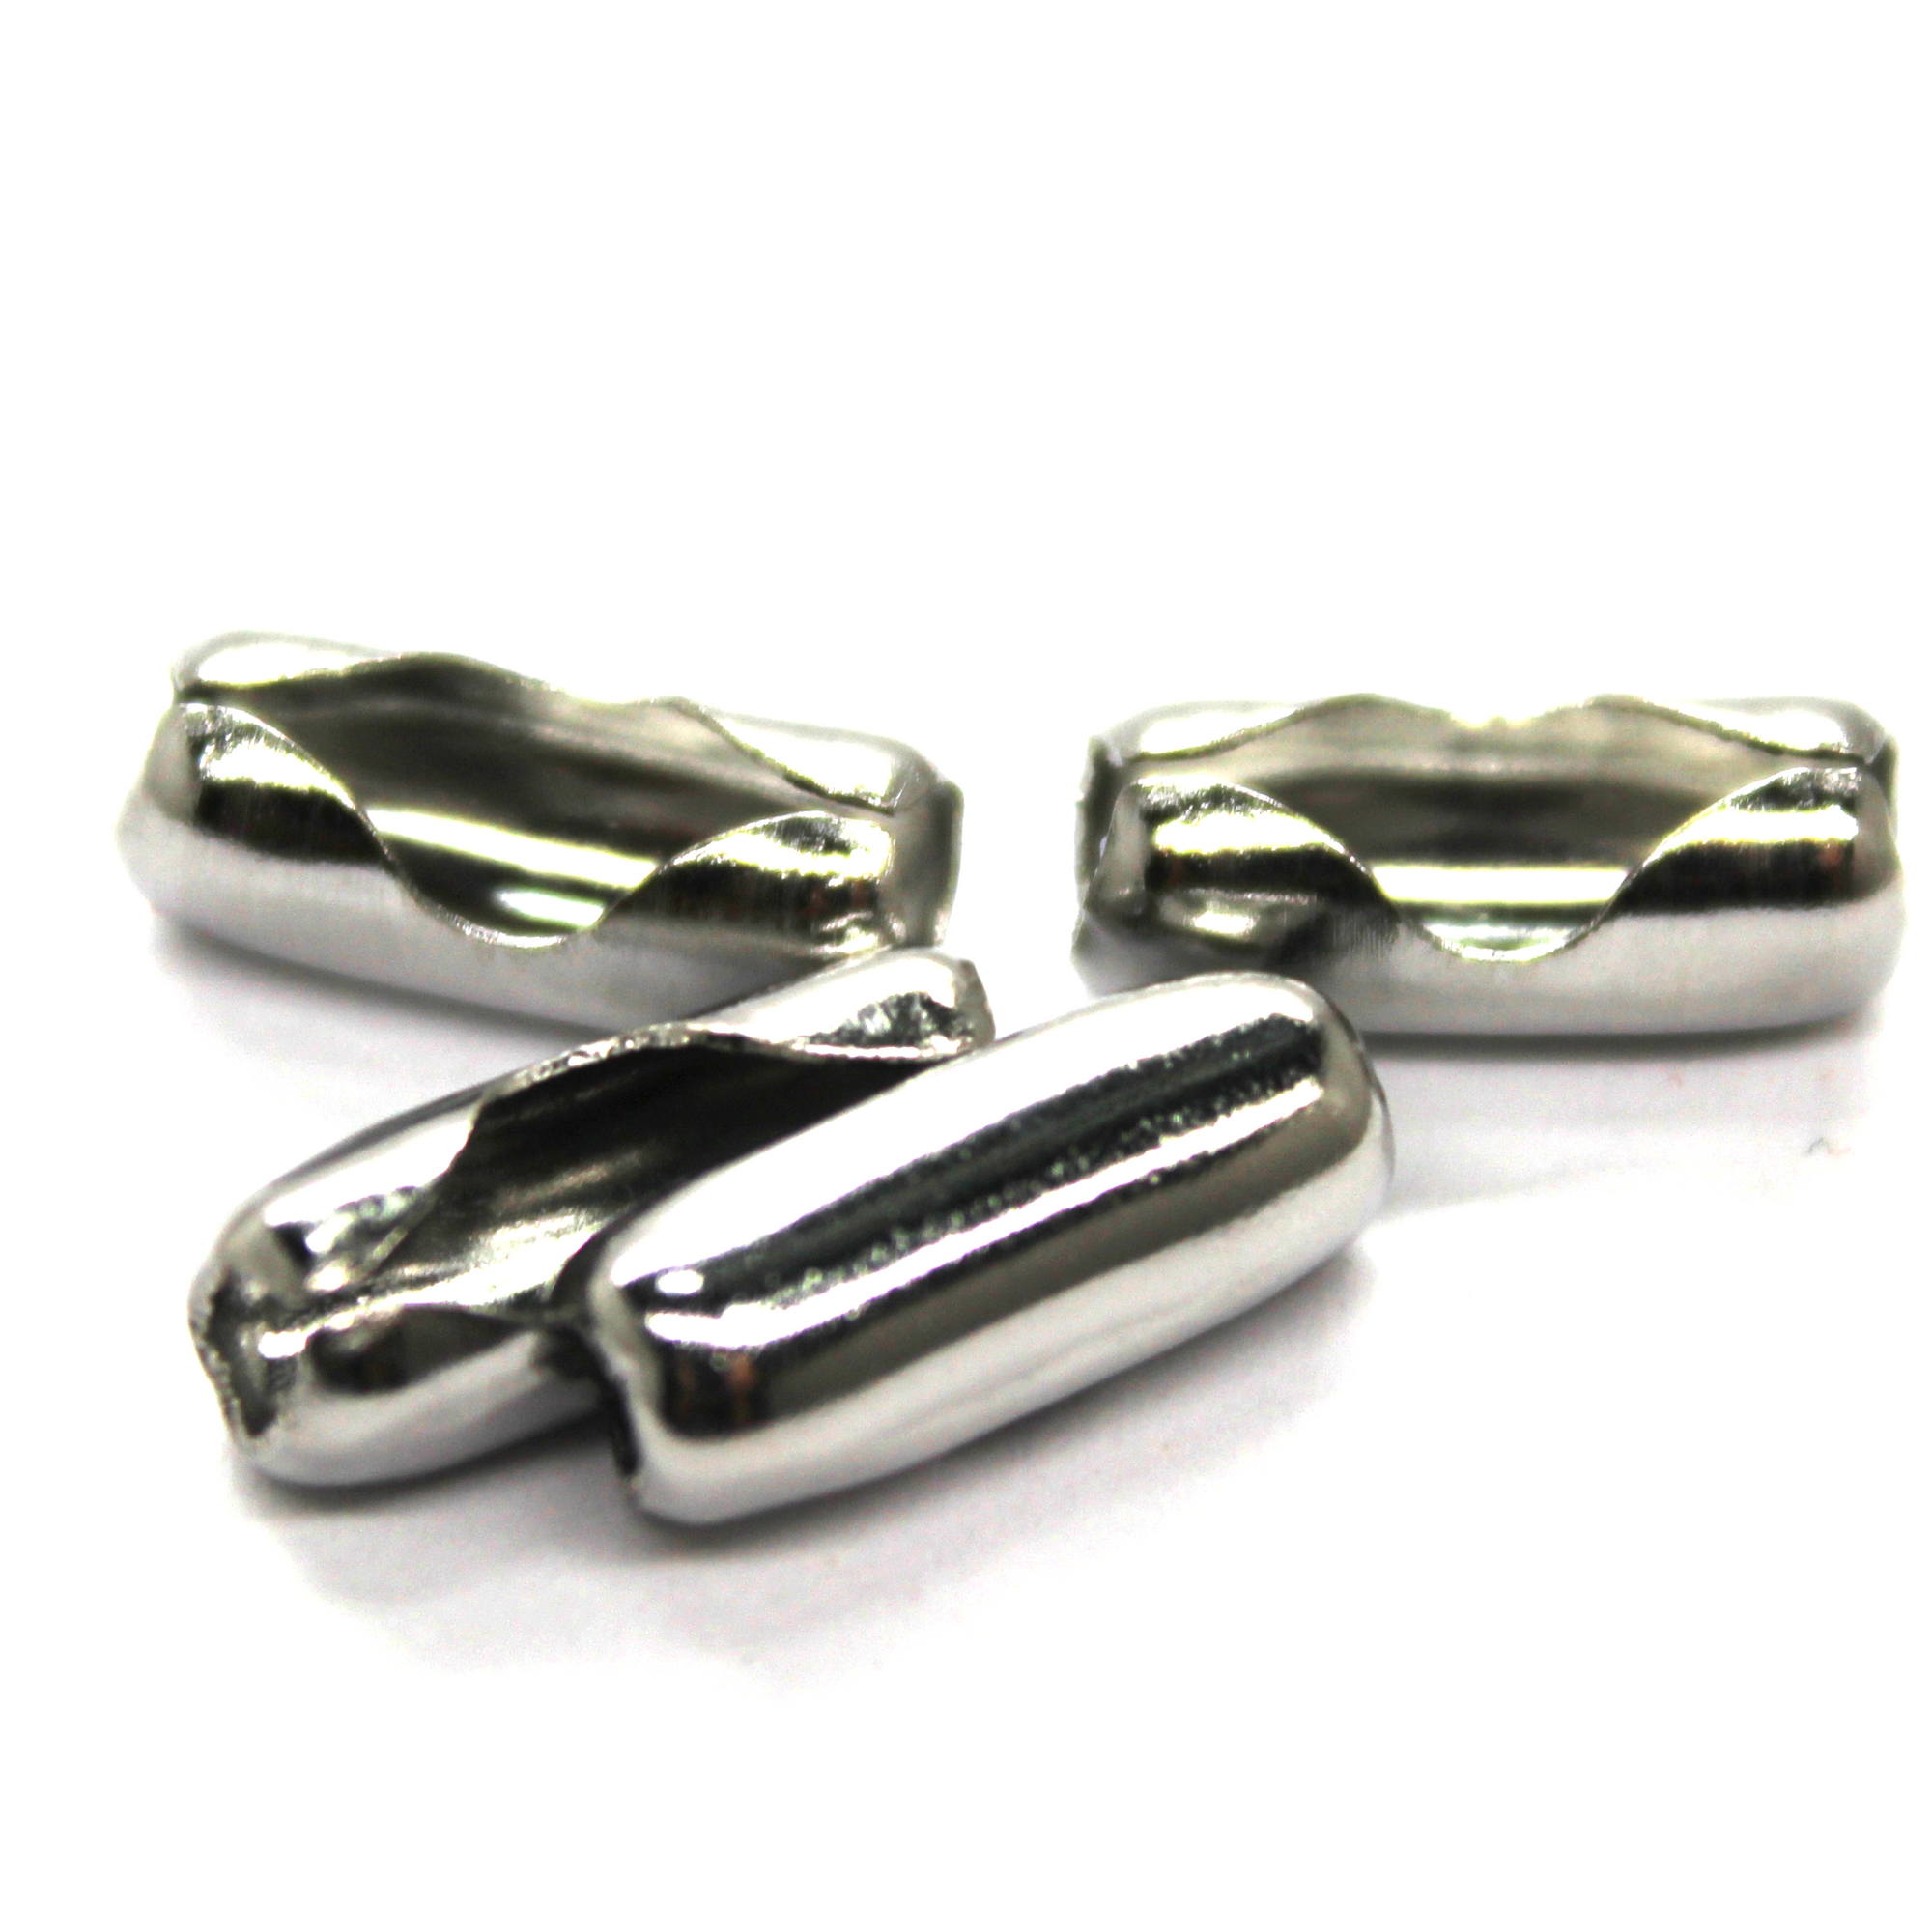 Clasp, Ball Chain Closer, Silver, Stainless Steel, 14mm x 5.5mm x 4mm, Sold Per pkg of 20